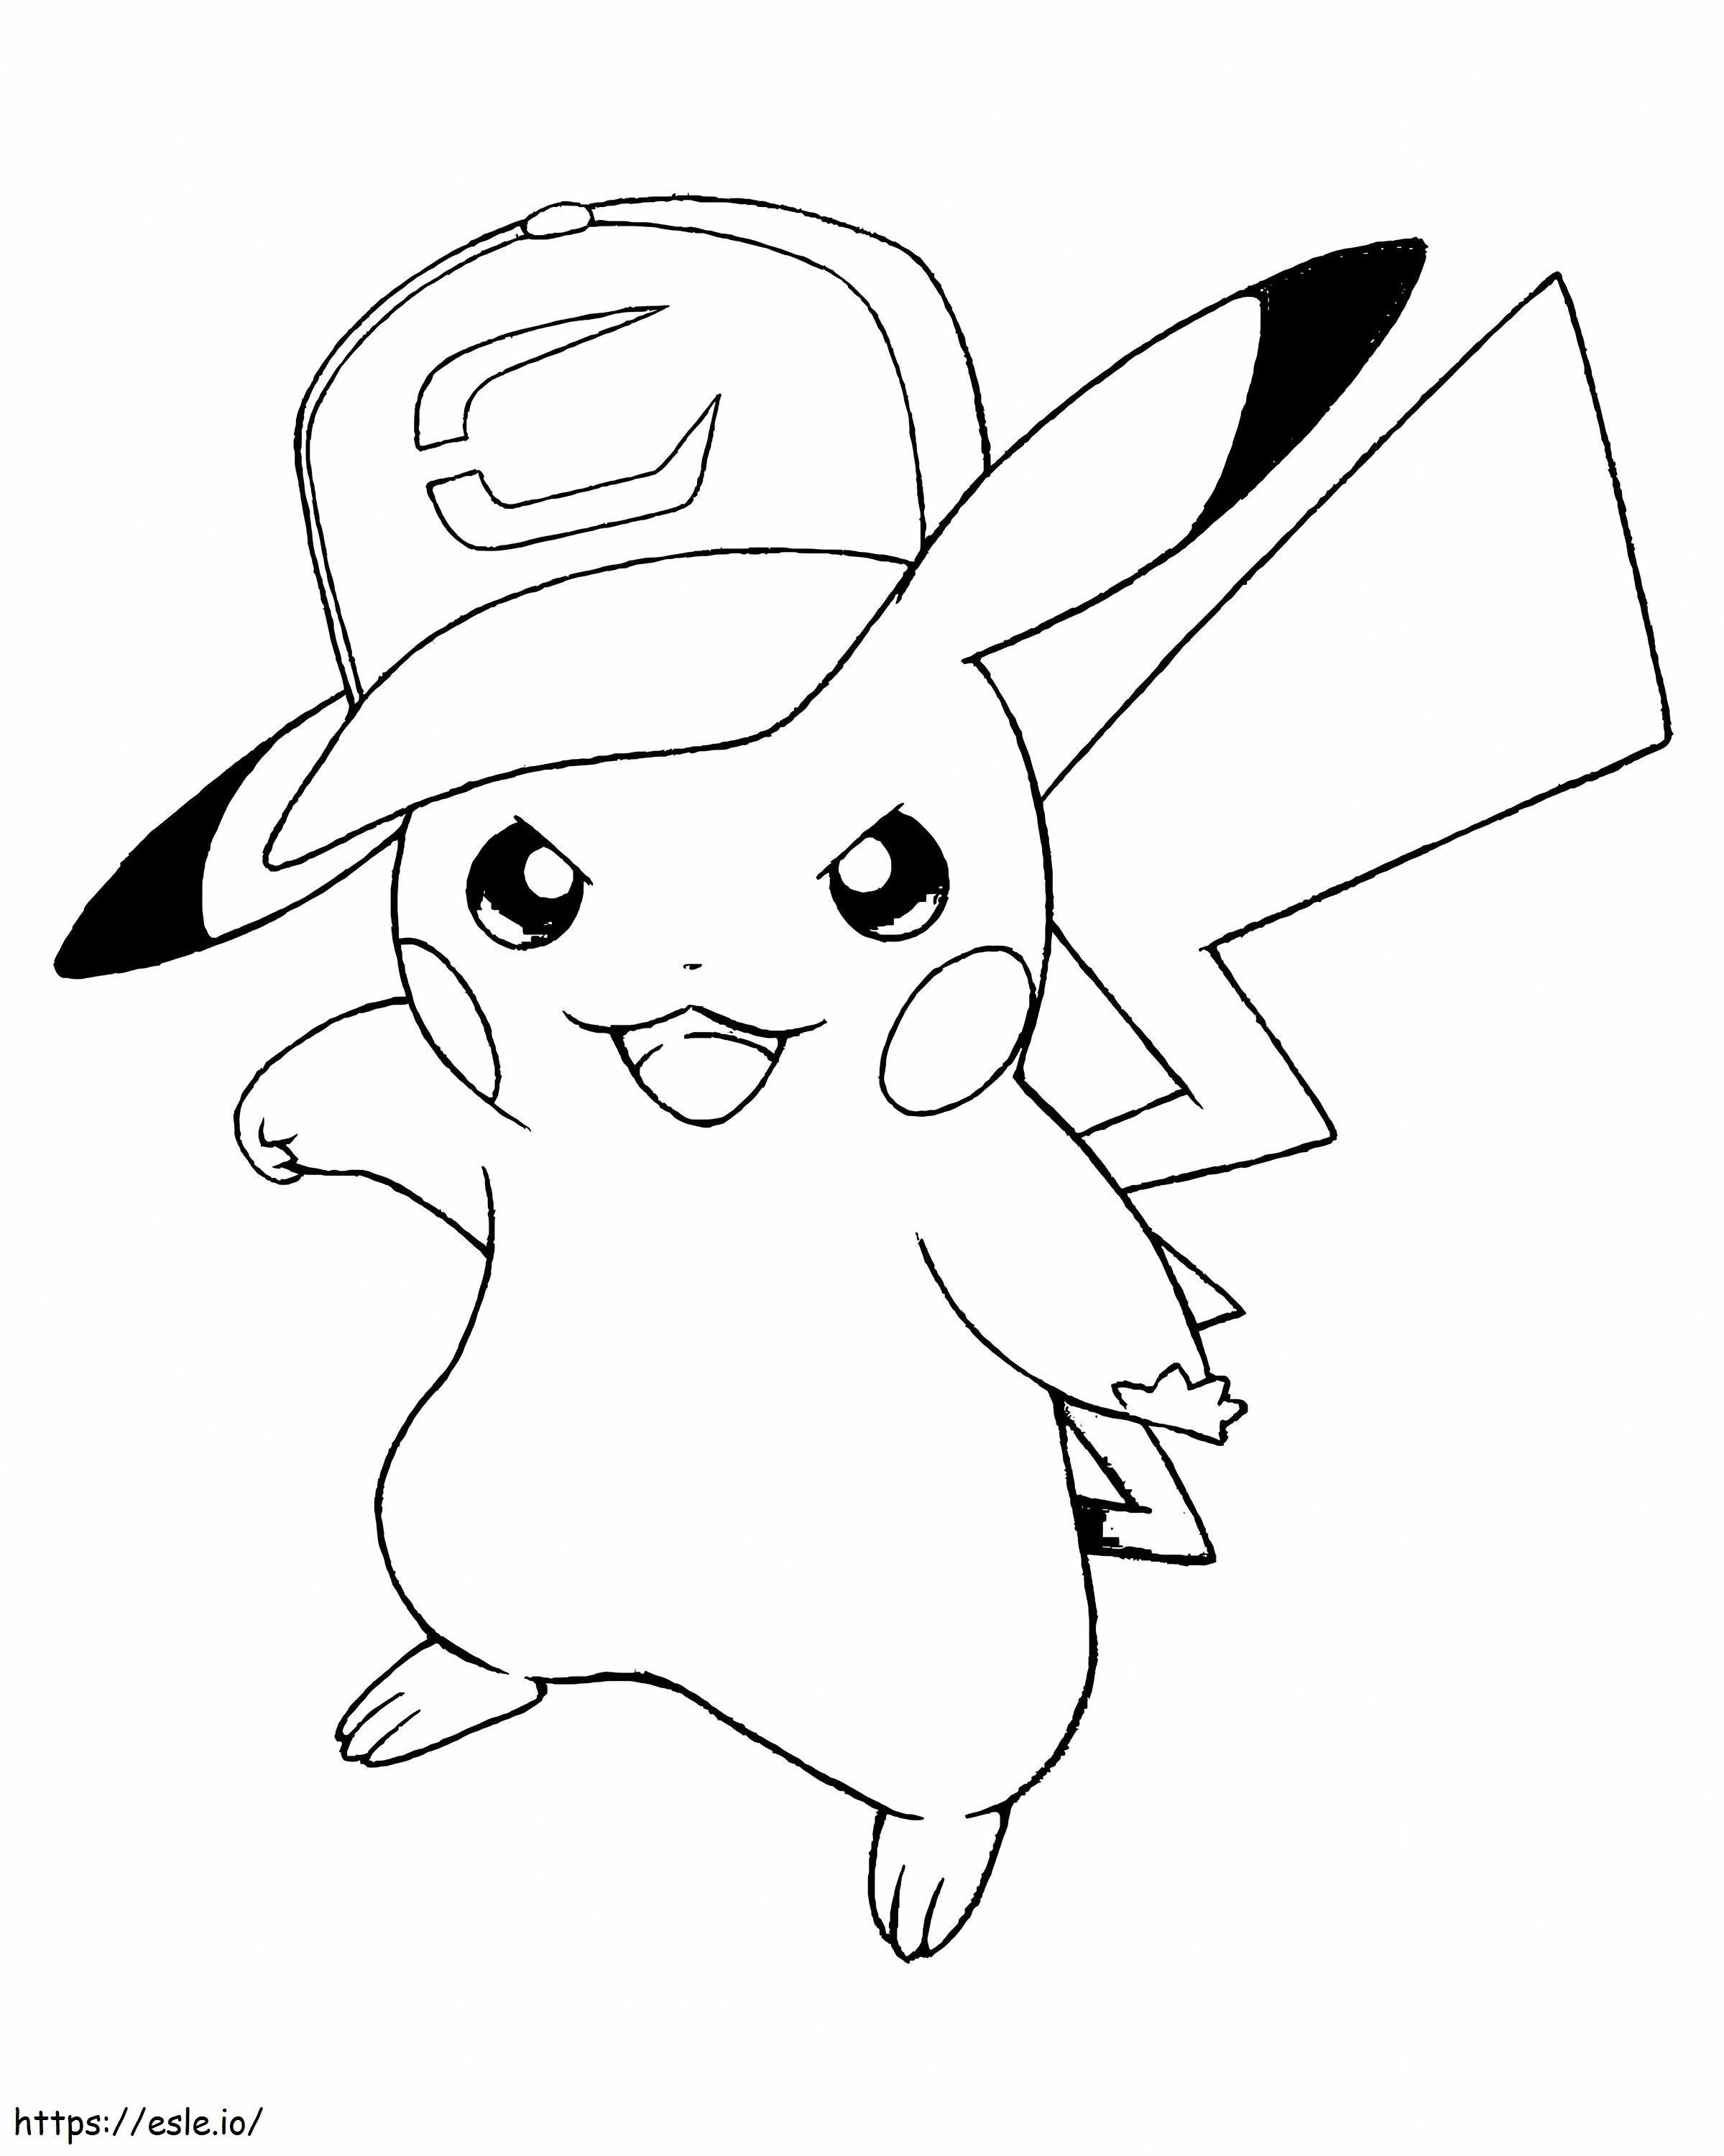 Great Pikachu coloring page